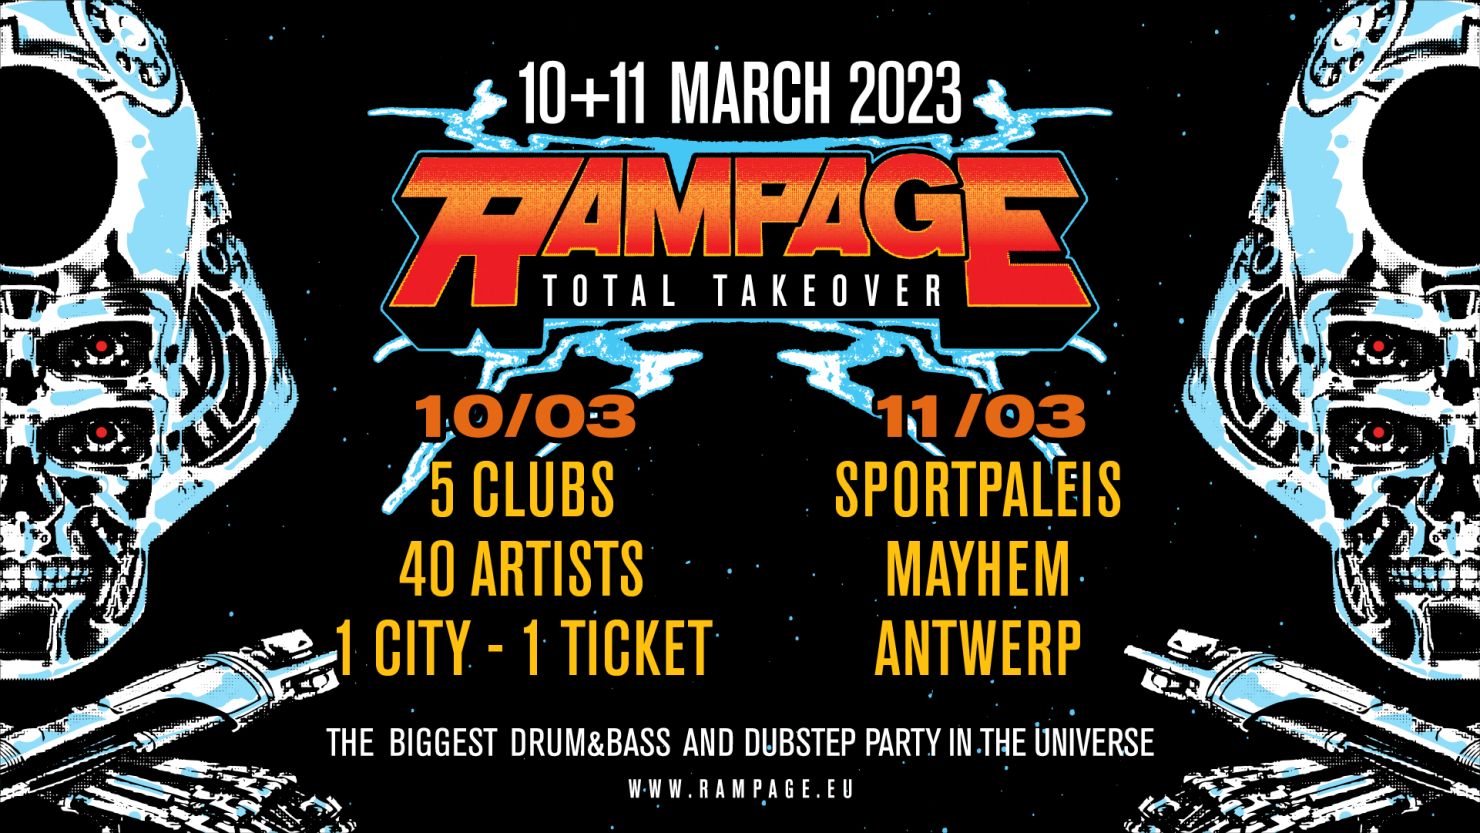 RAMPAGE TOTAL TAKEOVER